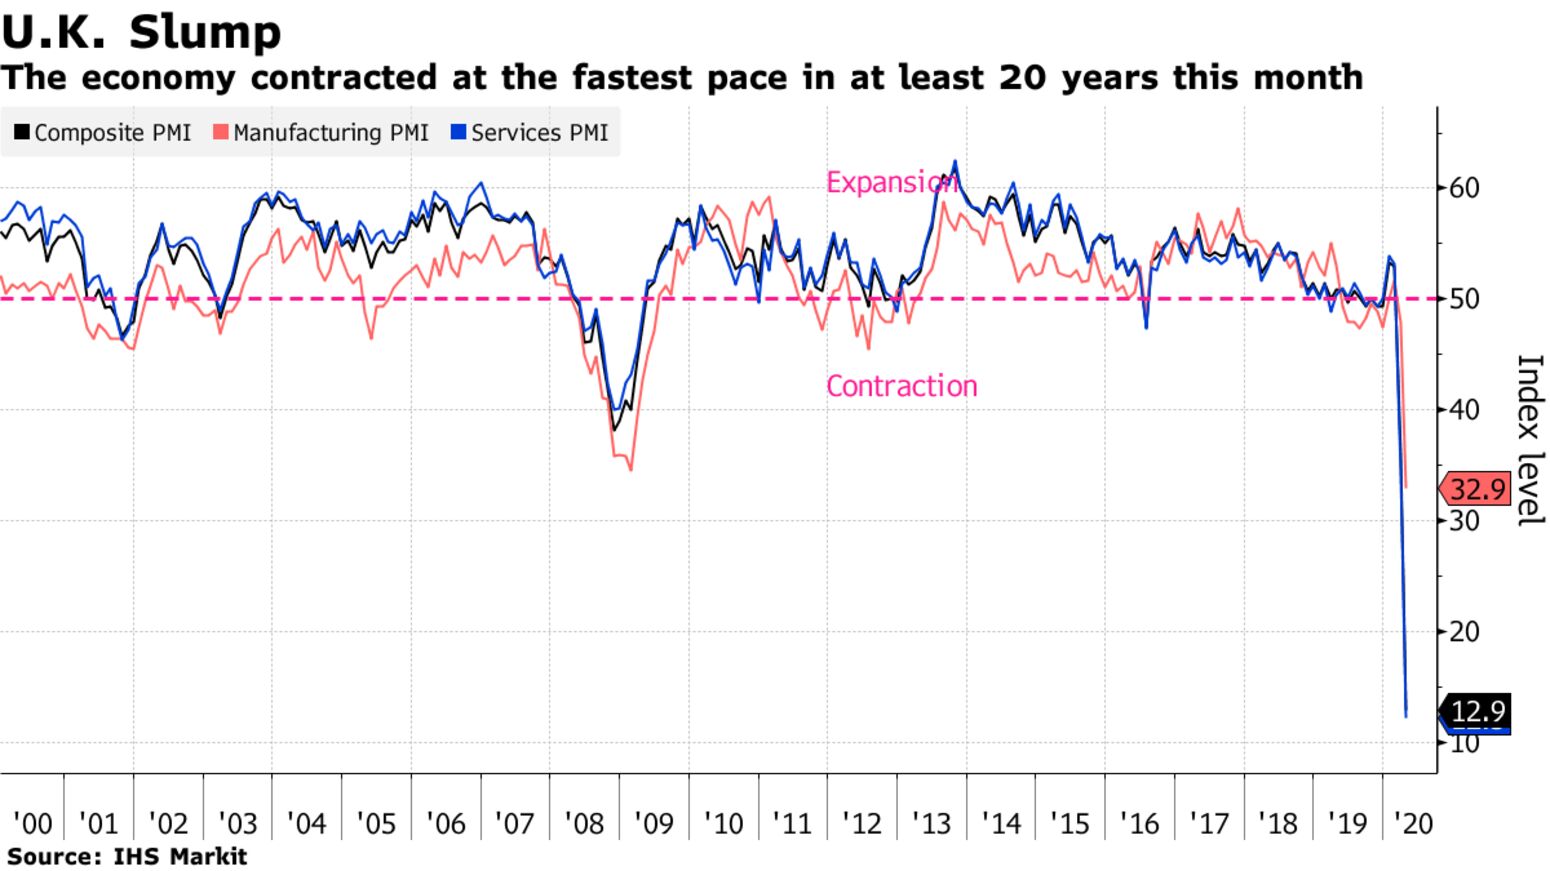 The economy contracted at the fastest pace in at least 20 years this month